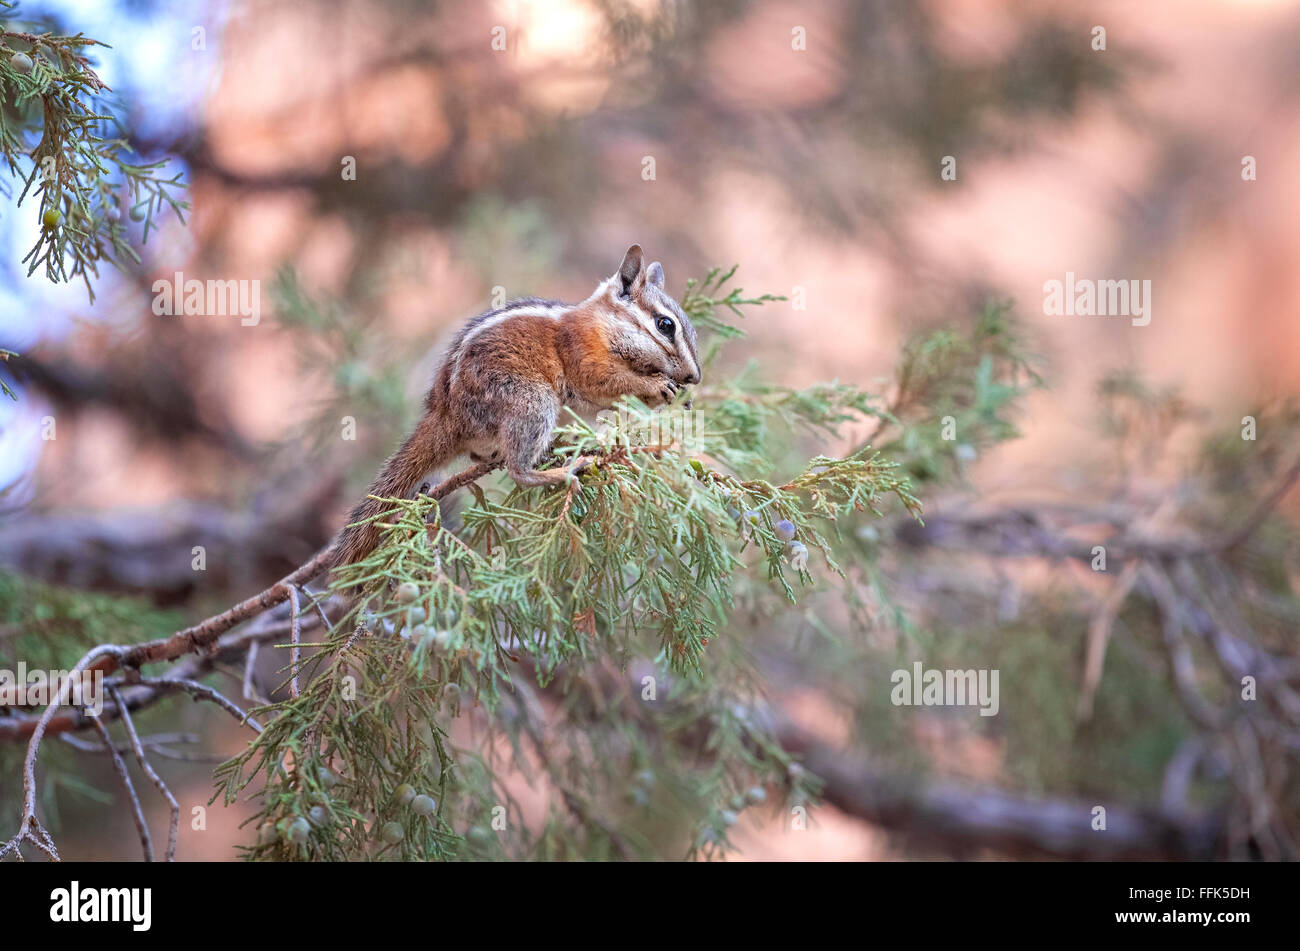 Squirrel eating on a tree, shallow depth of field. Stock Photo